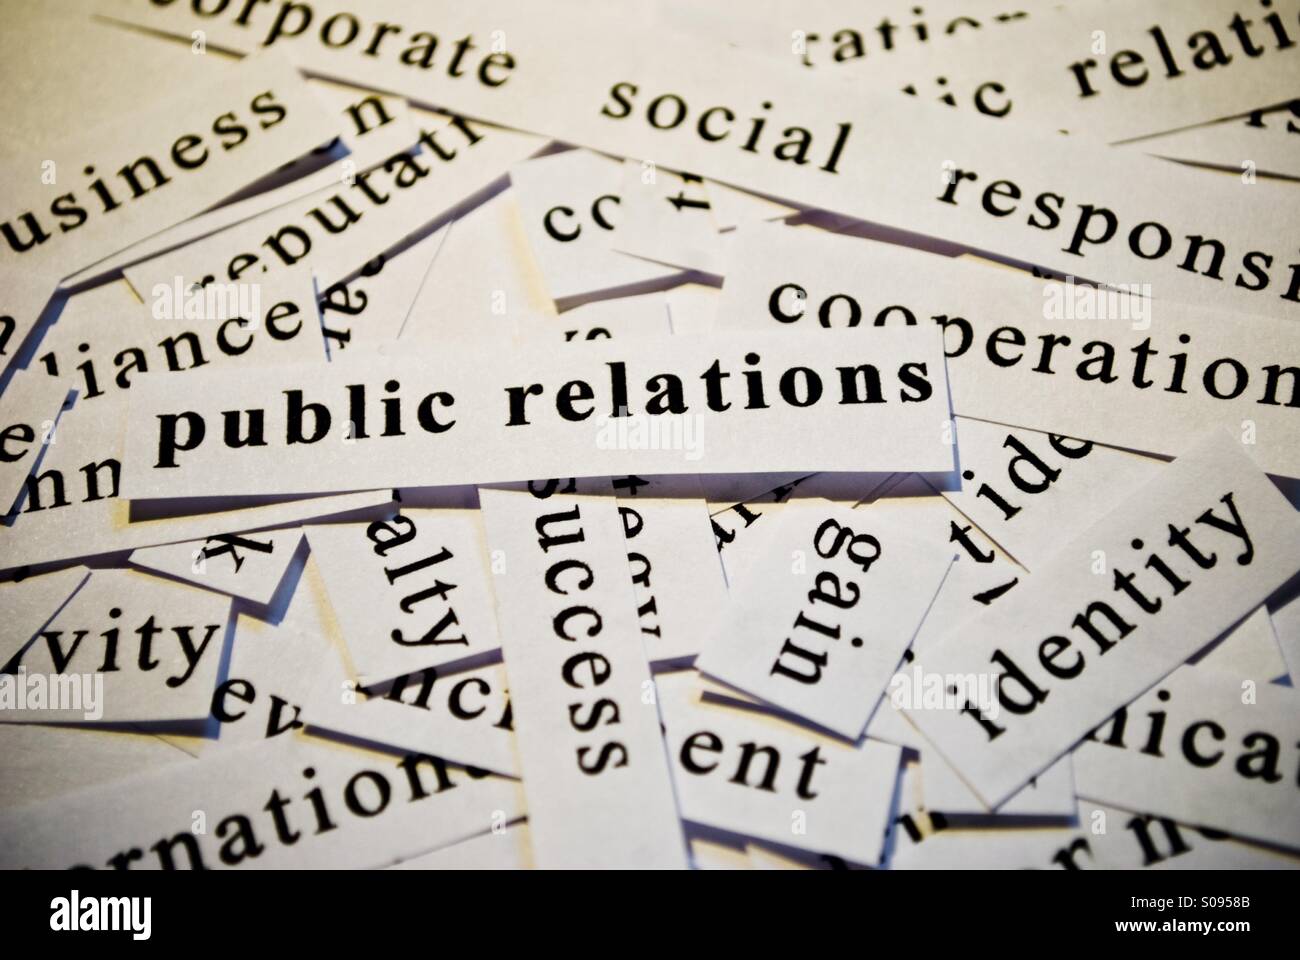 Public relations. Words related to business. Stock Photo